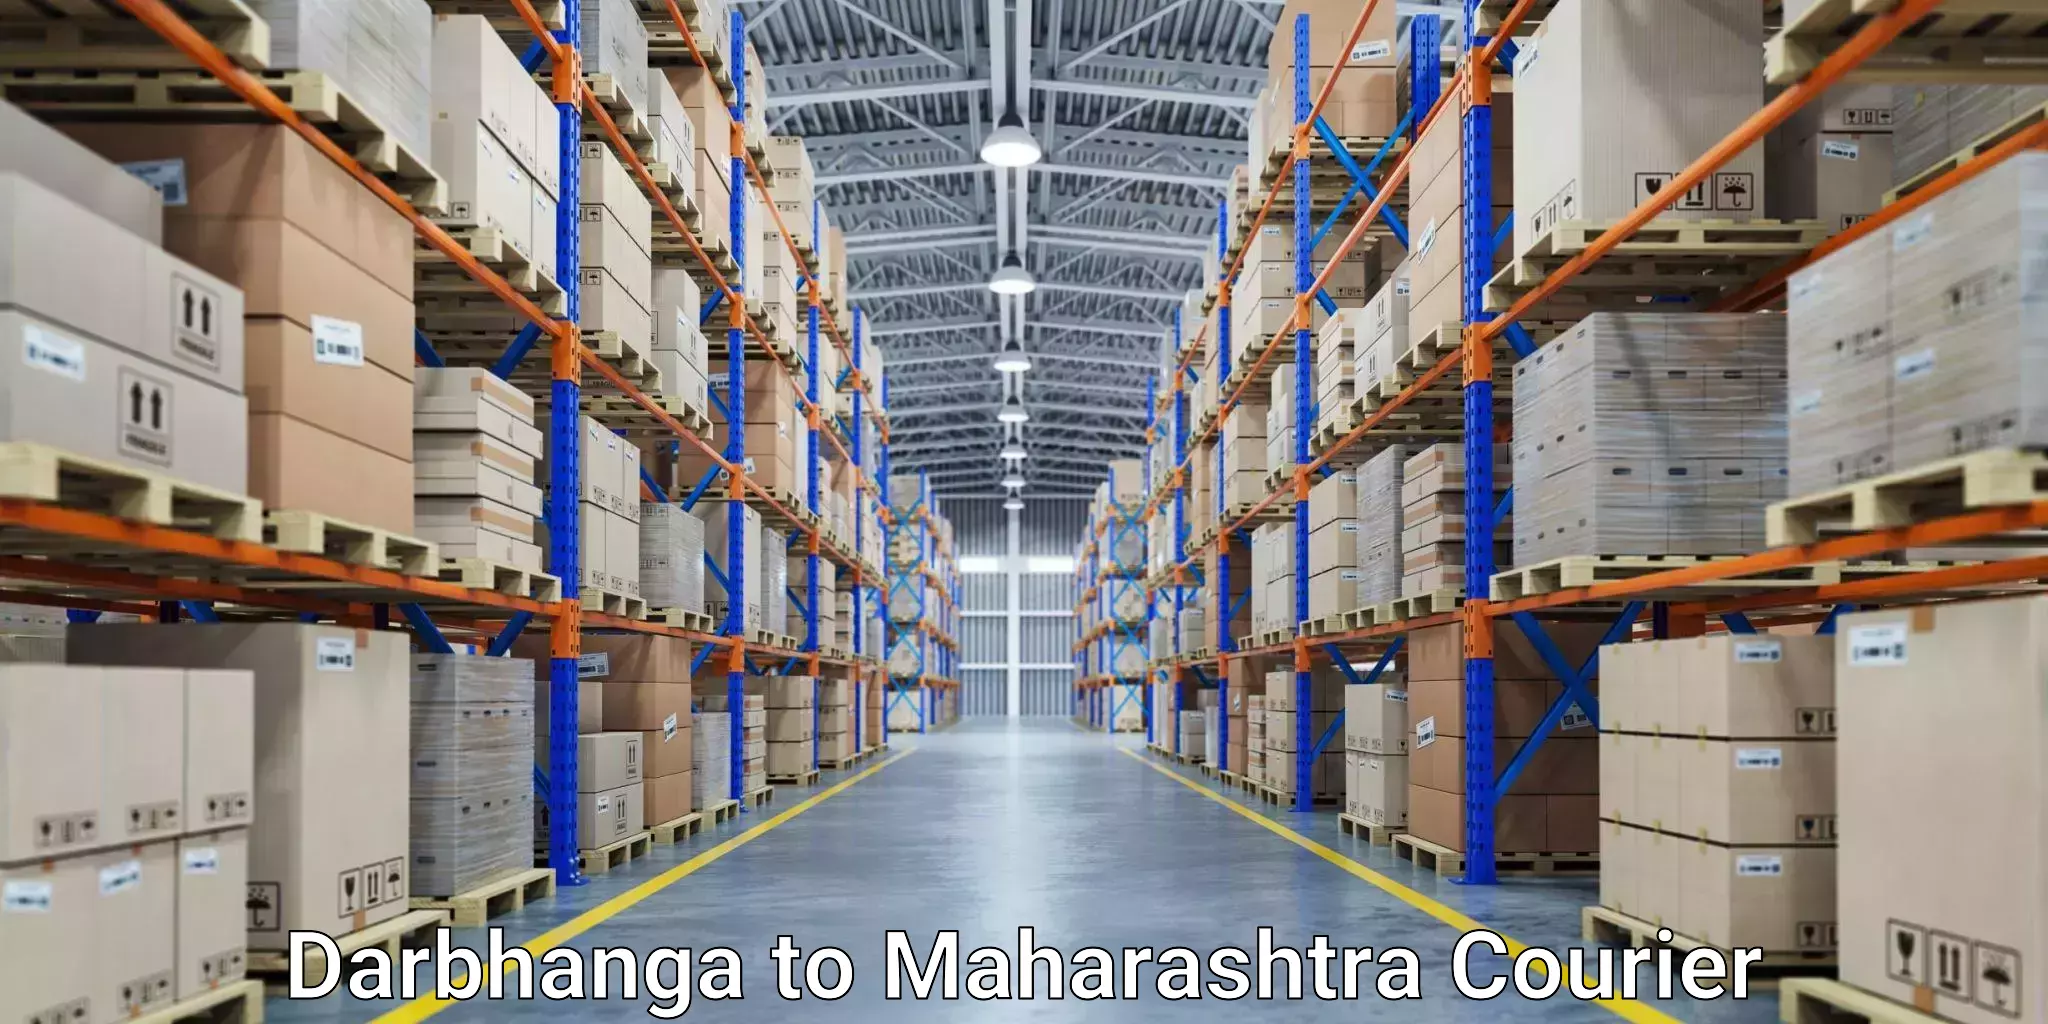 Express delivery capabilities in Darbhanga to Pandharkawada